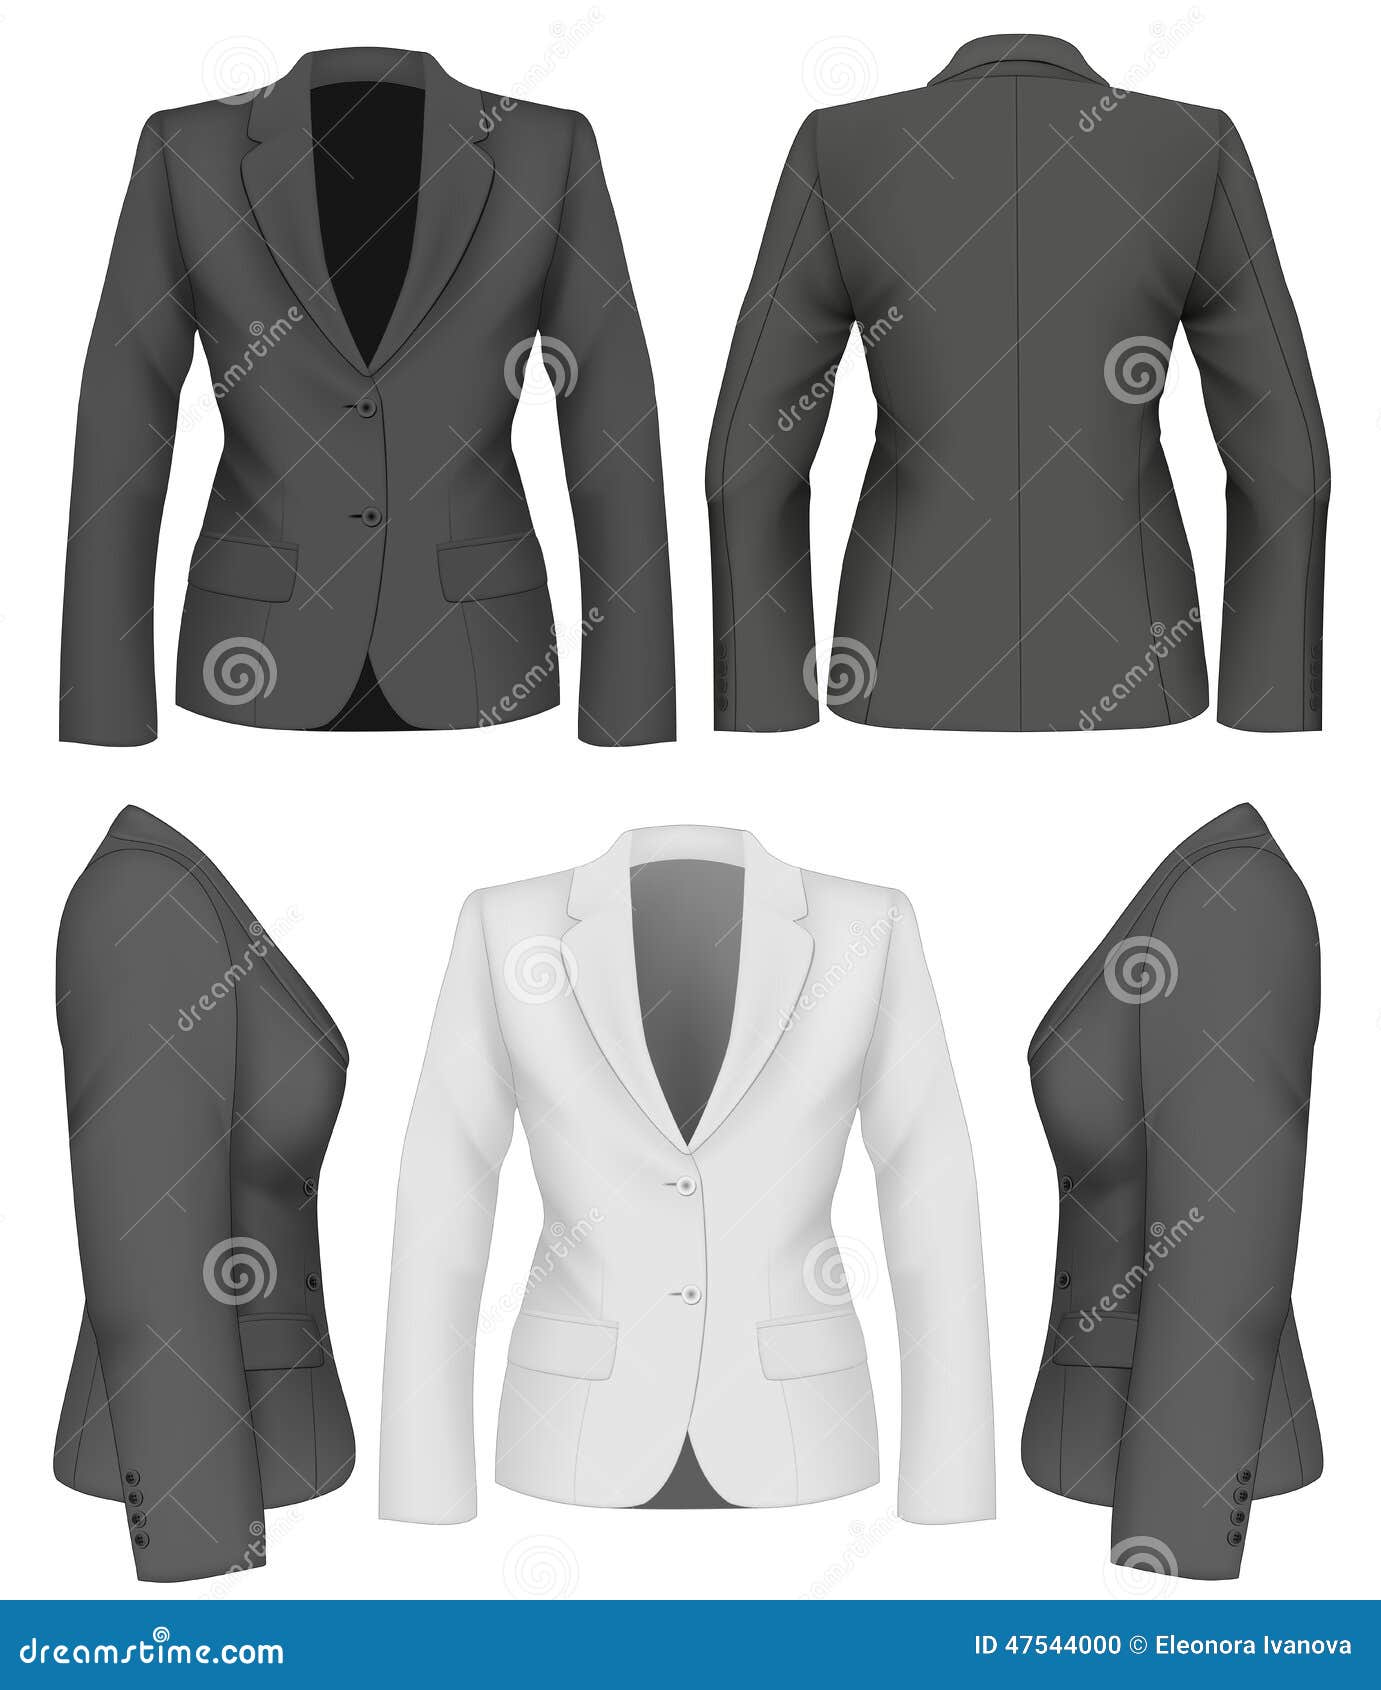 Buy MK988 Womens Business Formal Fashion One Button Lapel Blazer Suit  Jackets Green S at Amazon.in